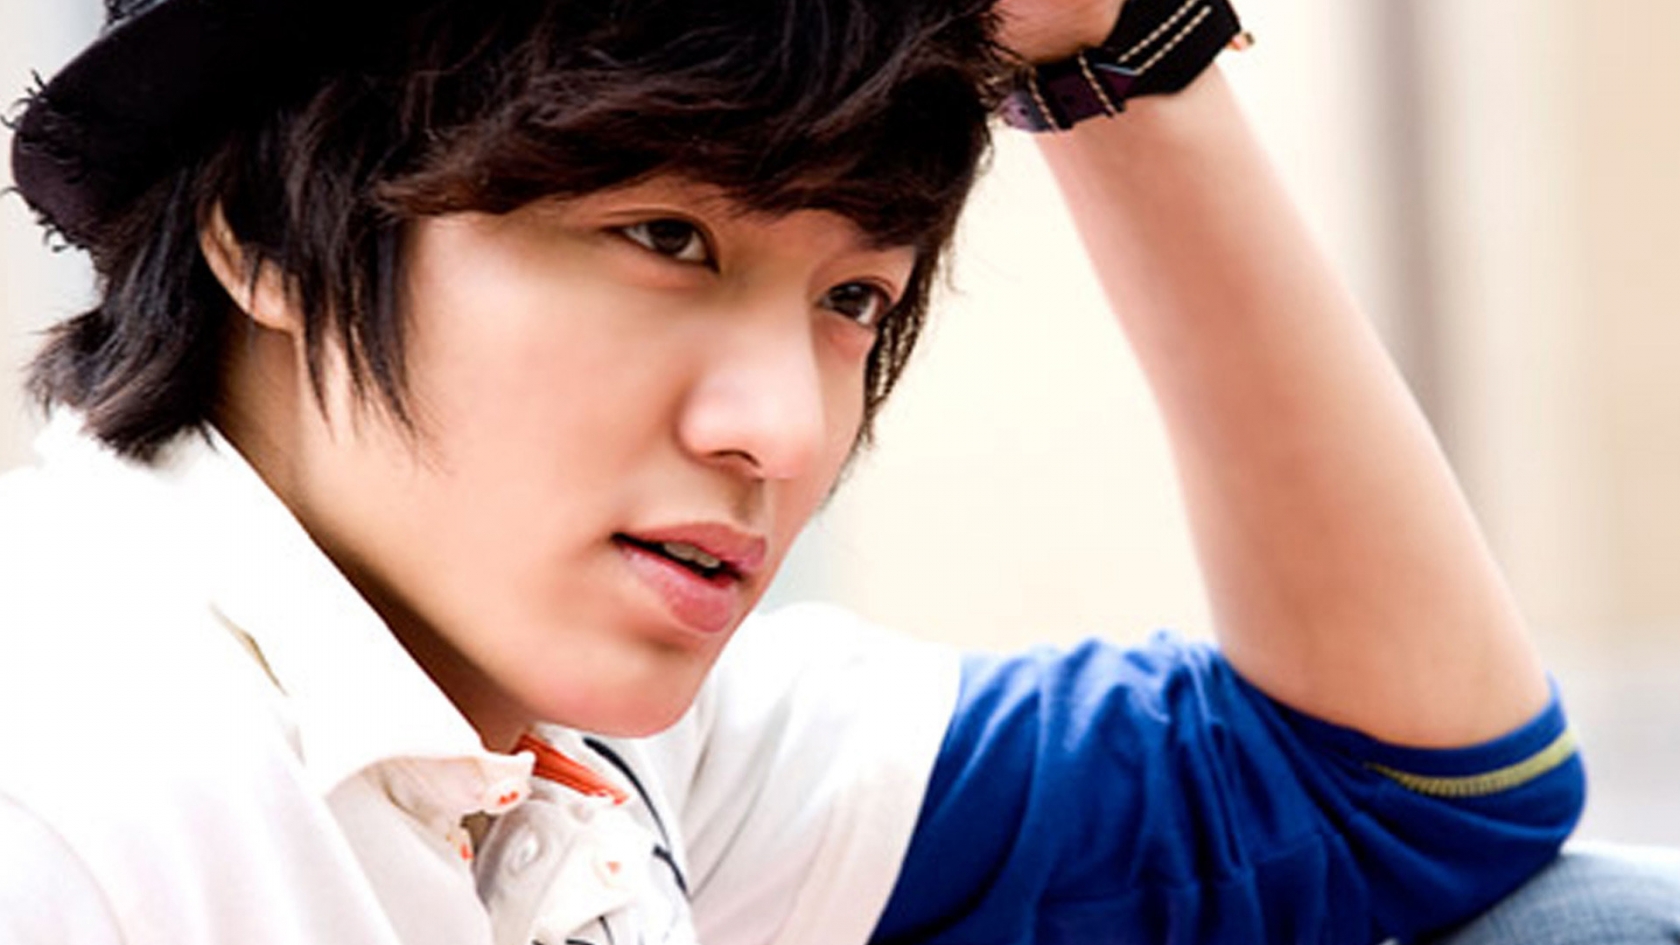 Lee Min Ho Profile Look for 1680 x 945 HDTV resolution